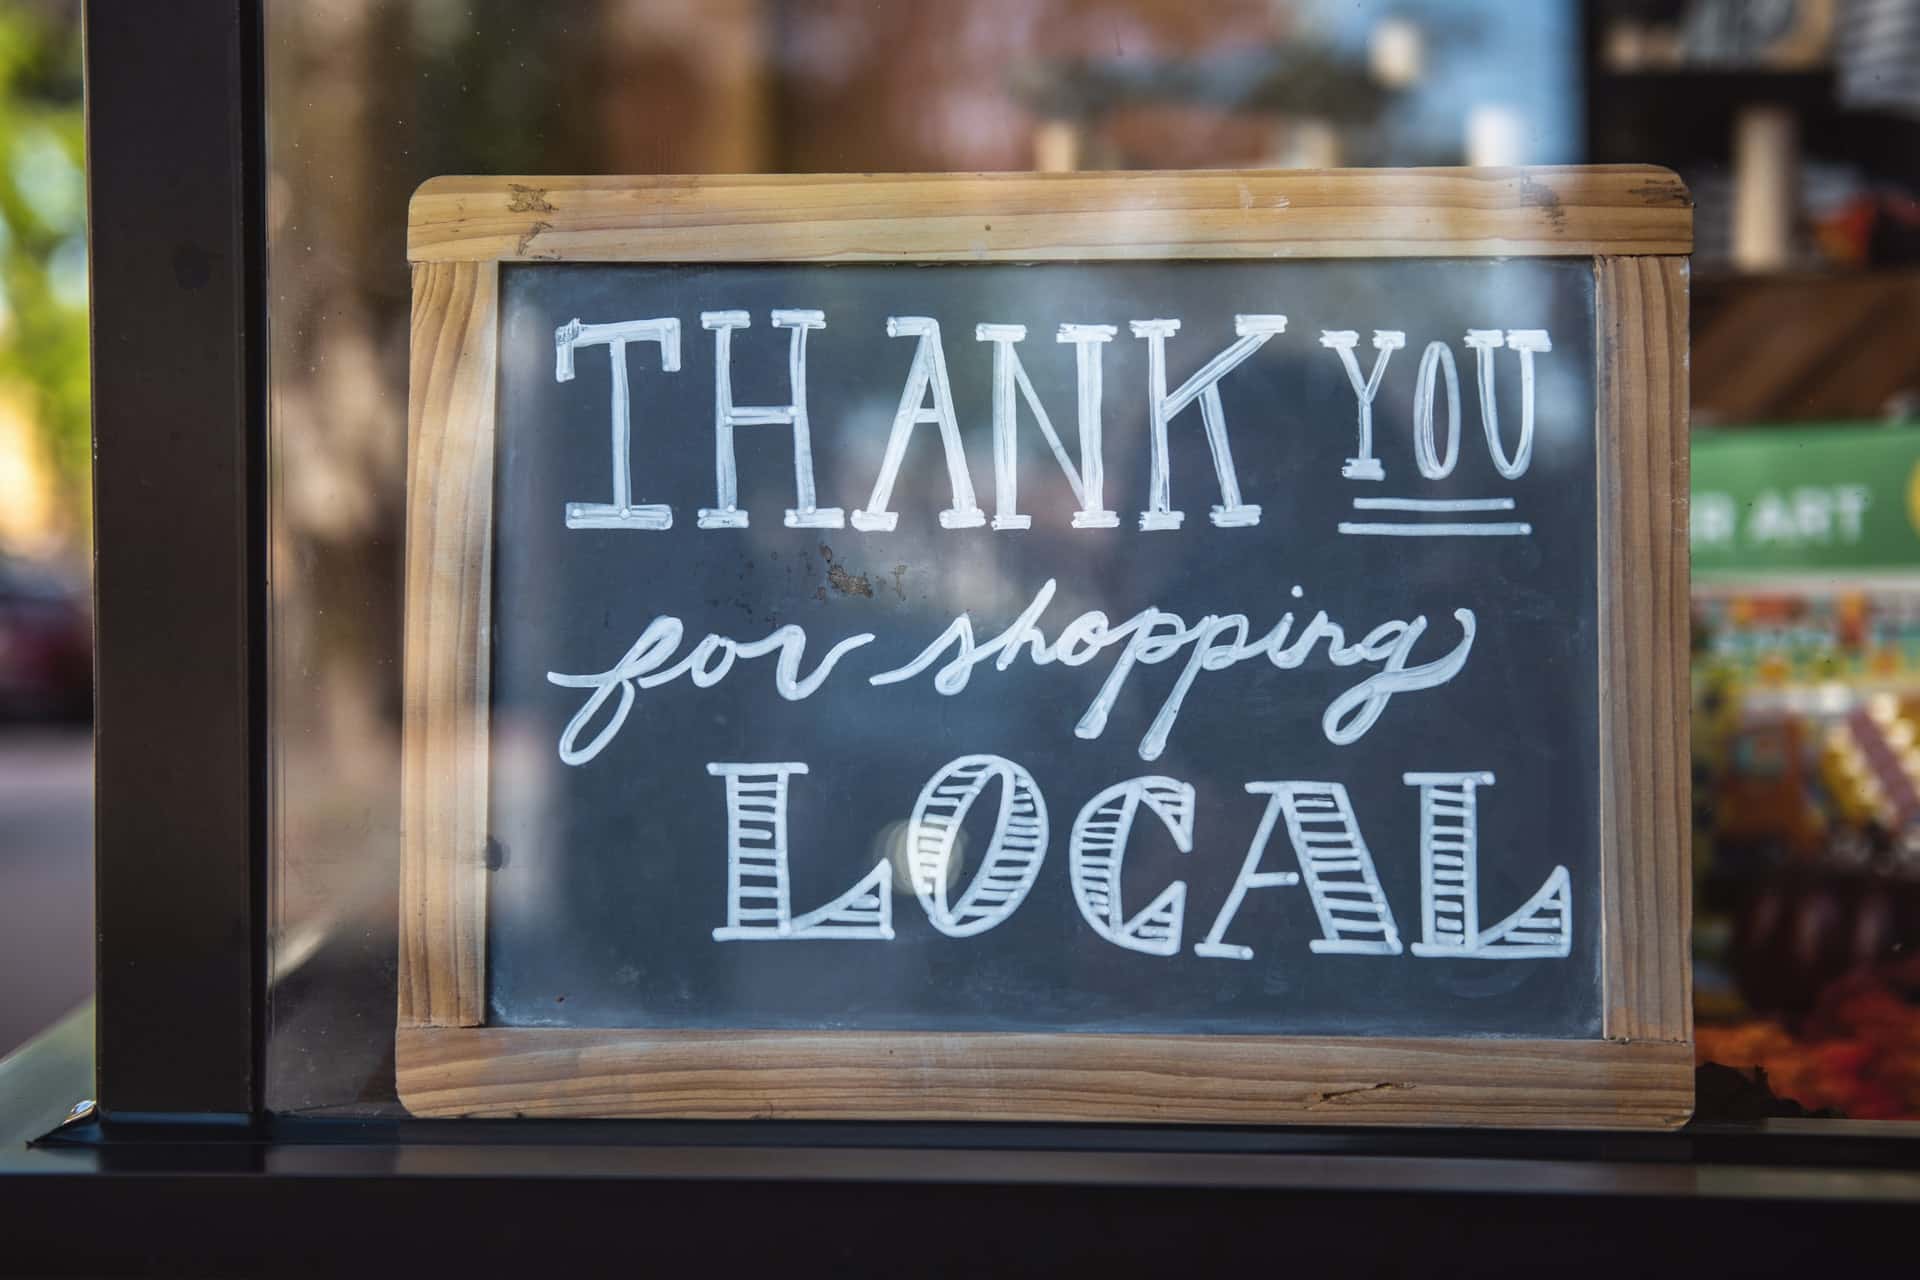 5 Ways to Grow Your Business Locally